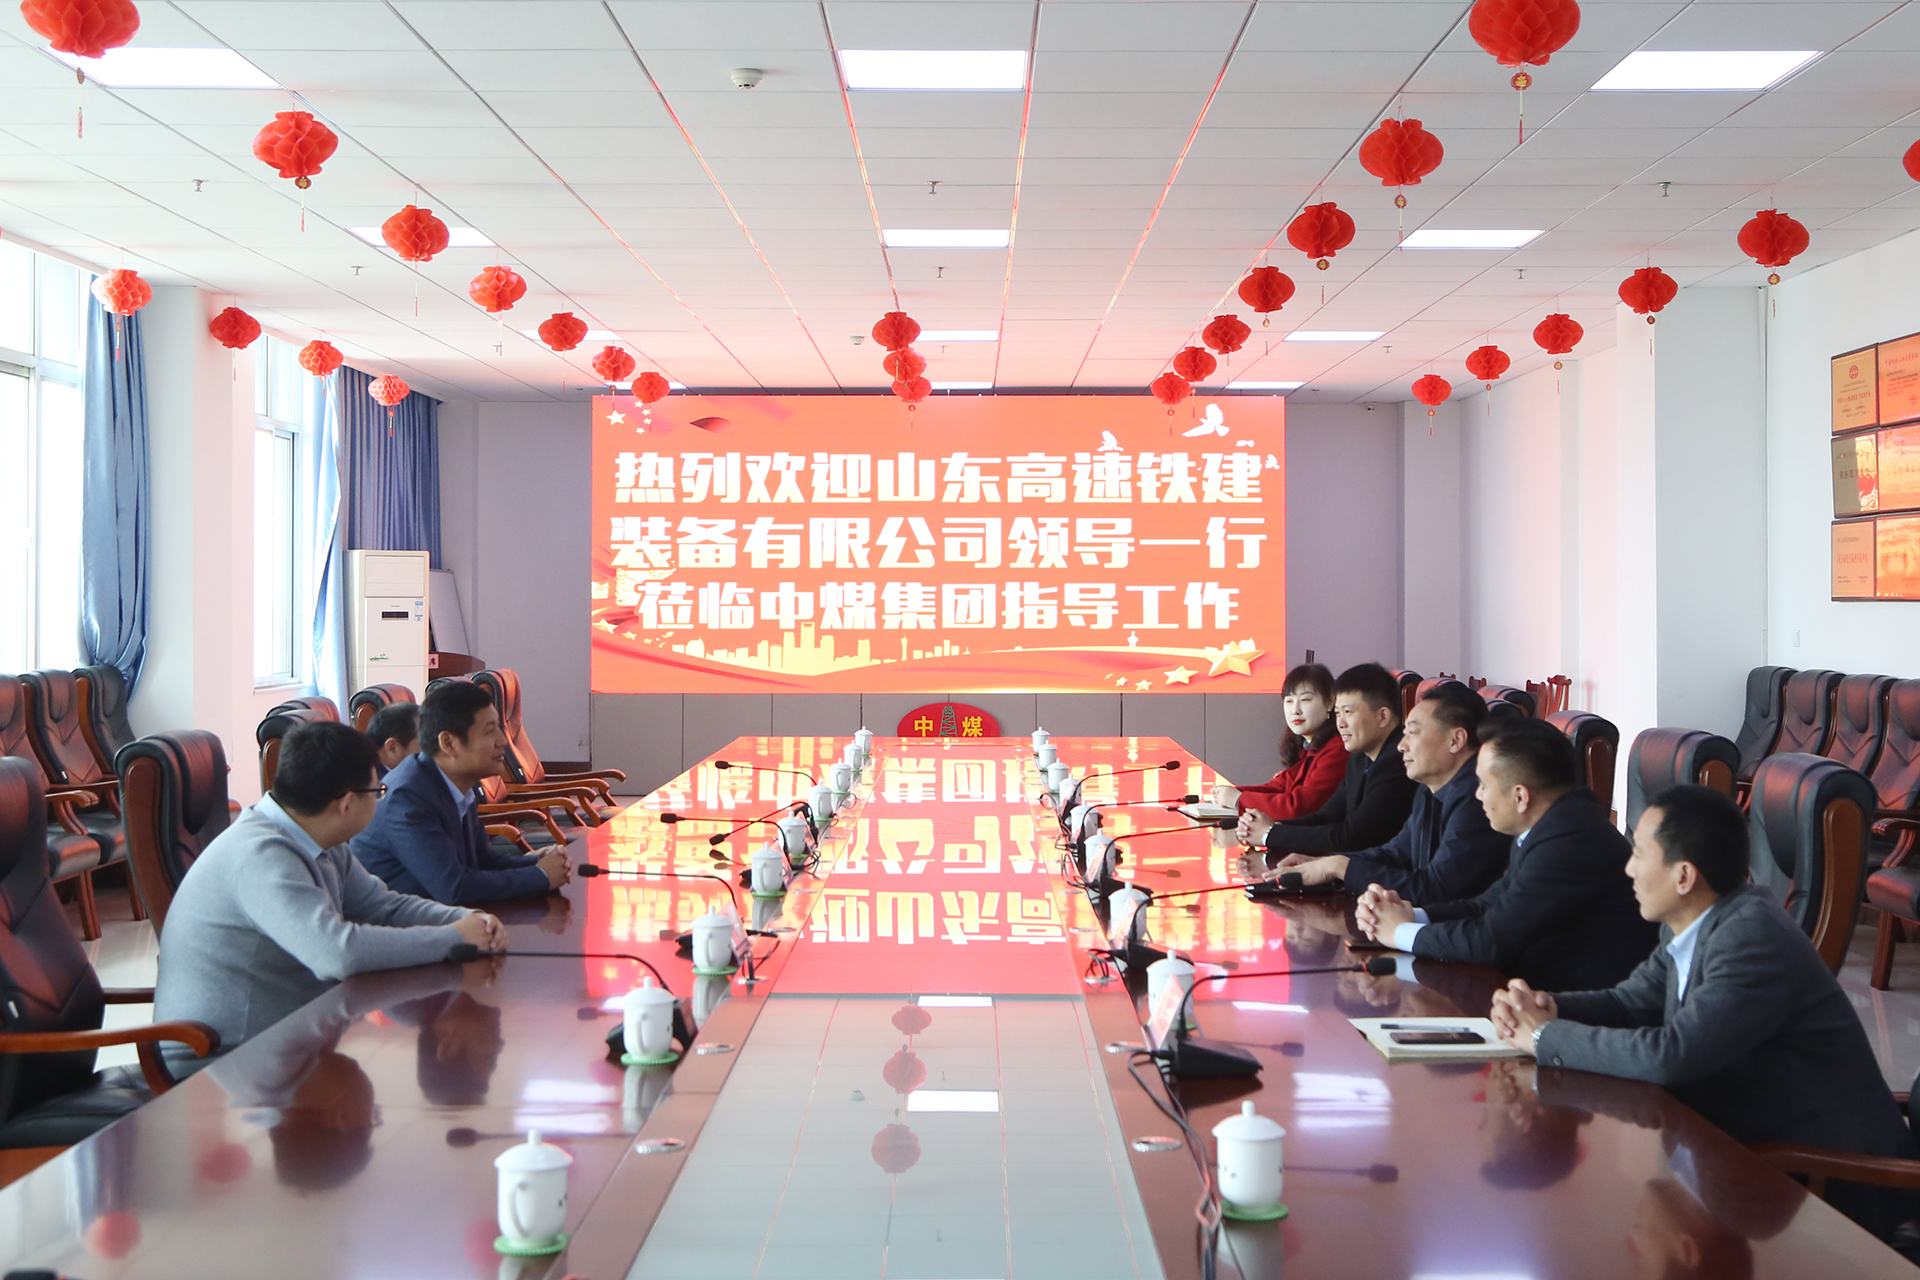 Warmly Welcome The Leaders Of Shandong High Speed Railway Construction Equipment Co., Ltd. To Visit China Coal Group